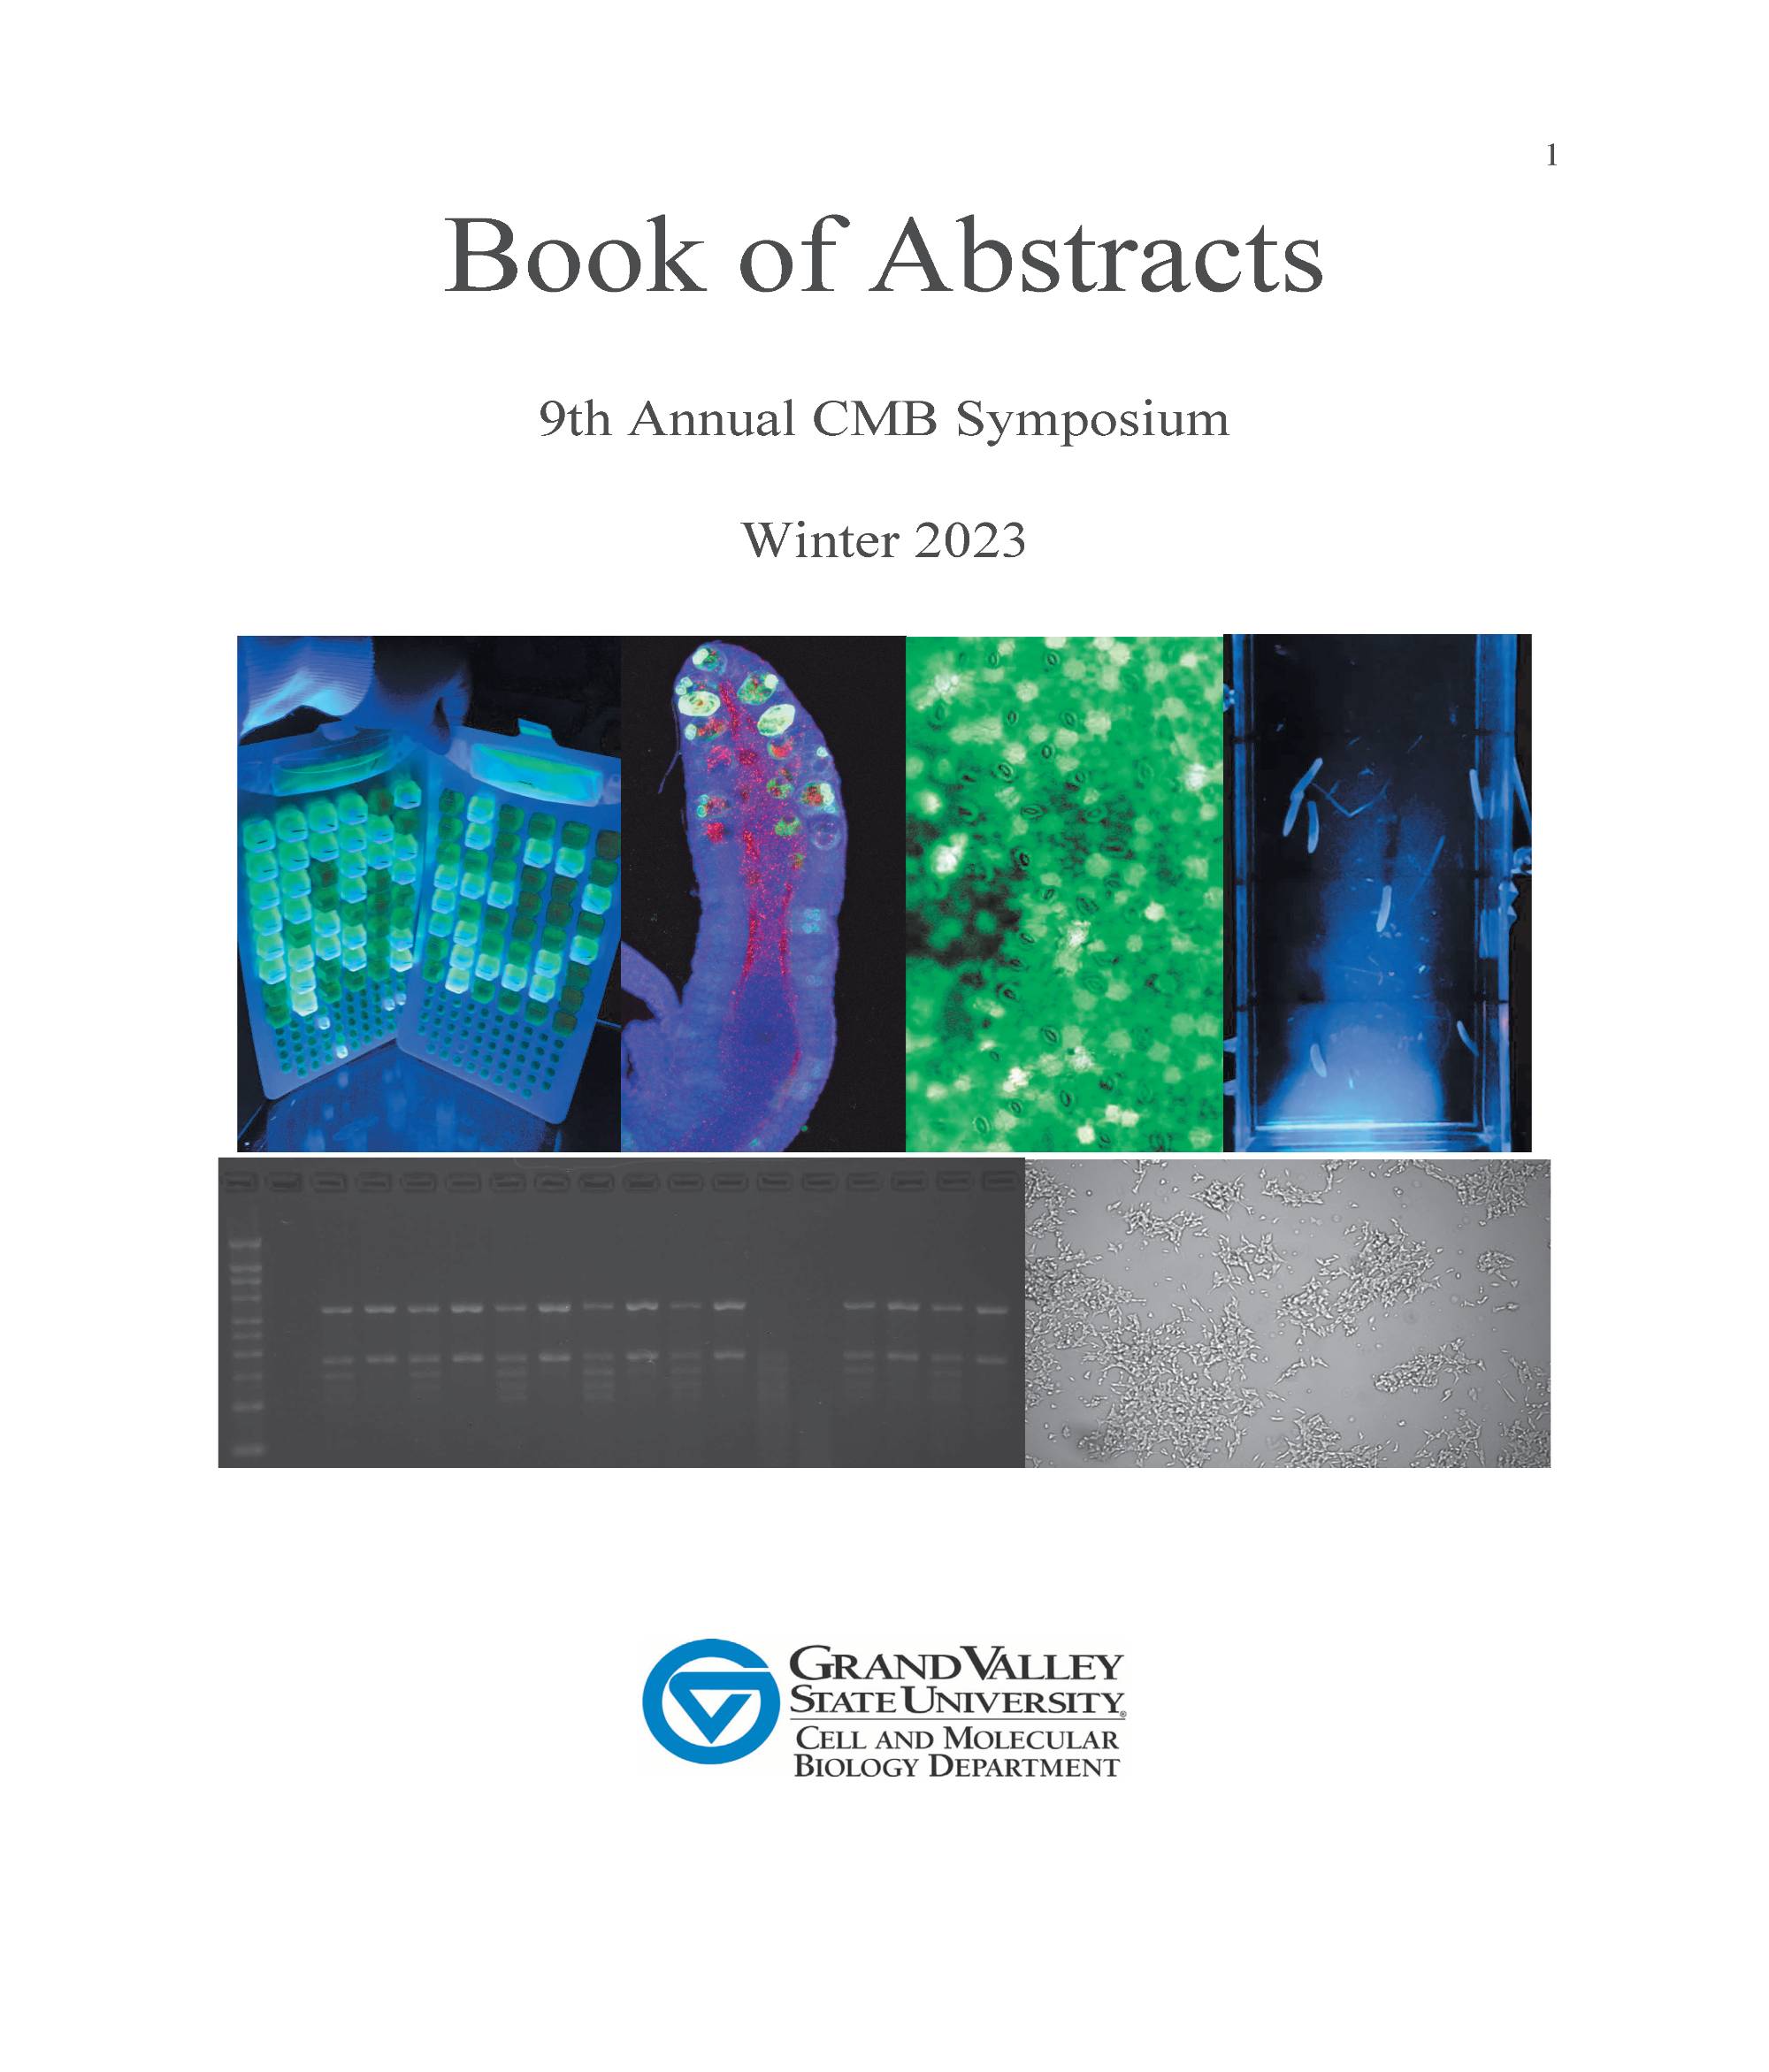 Book of Abstracts for CMB Symposium